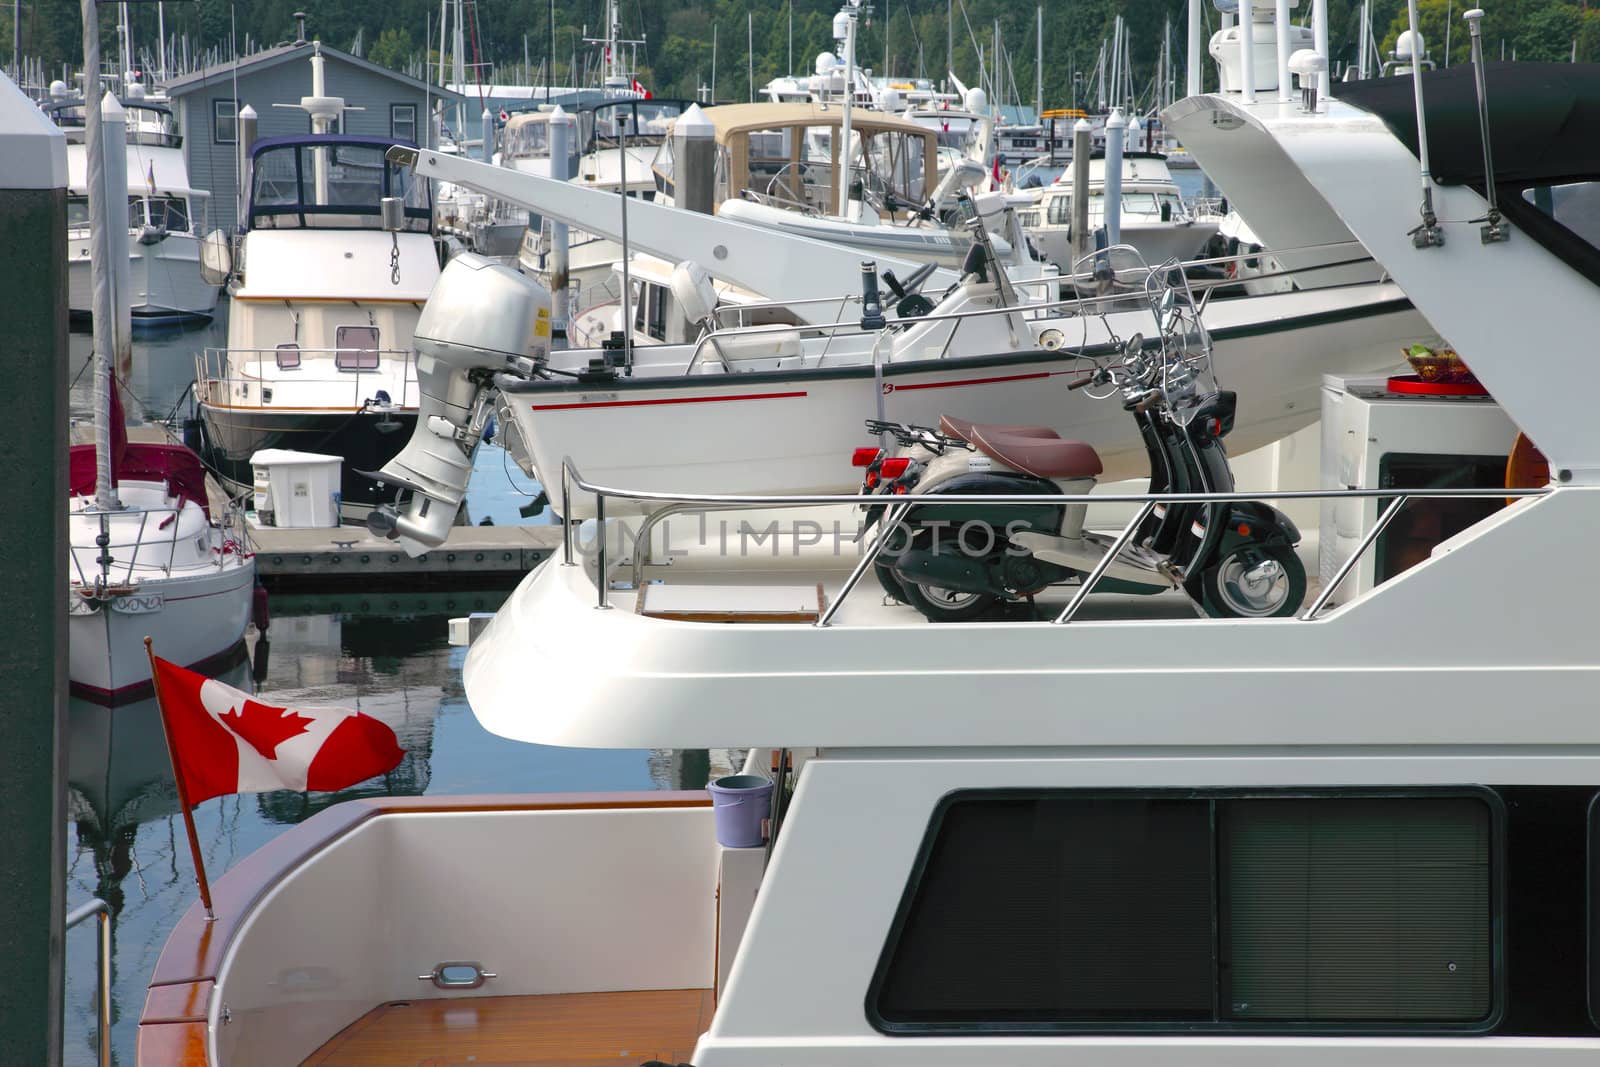 Two scooters on a yacht in Vancouver BC. Canada.